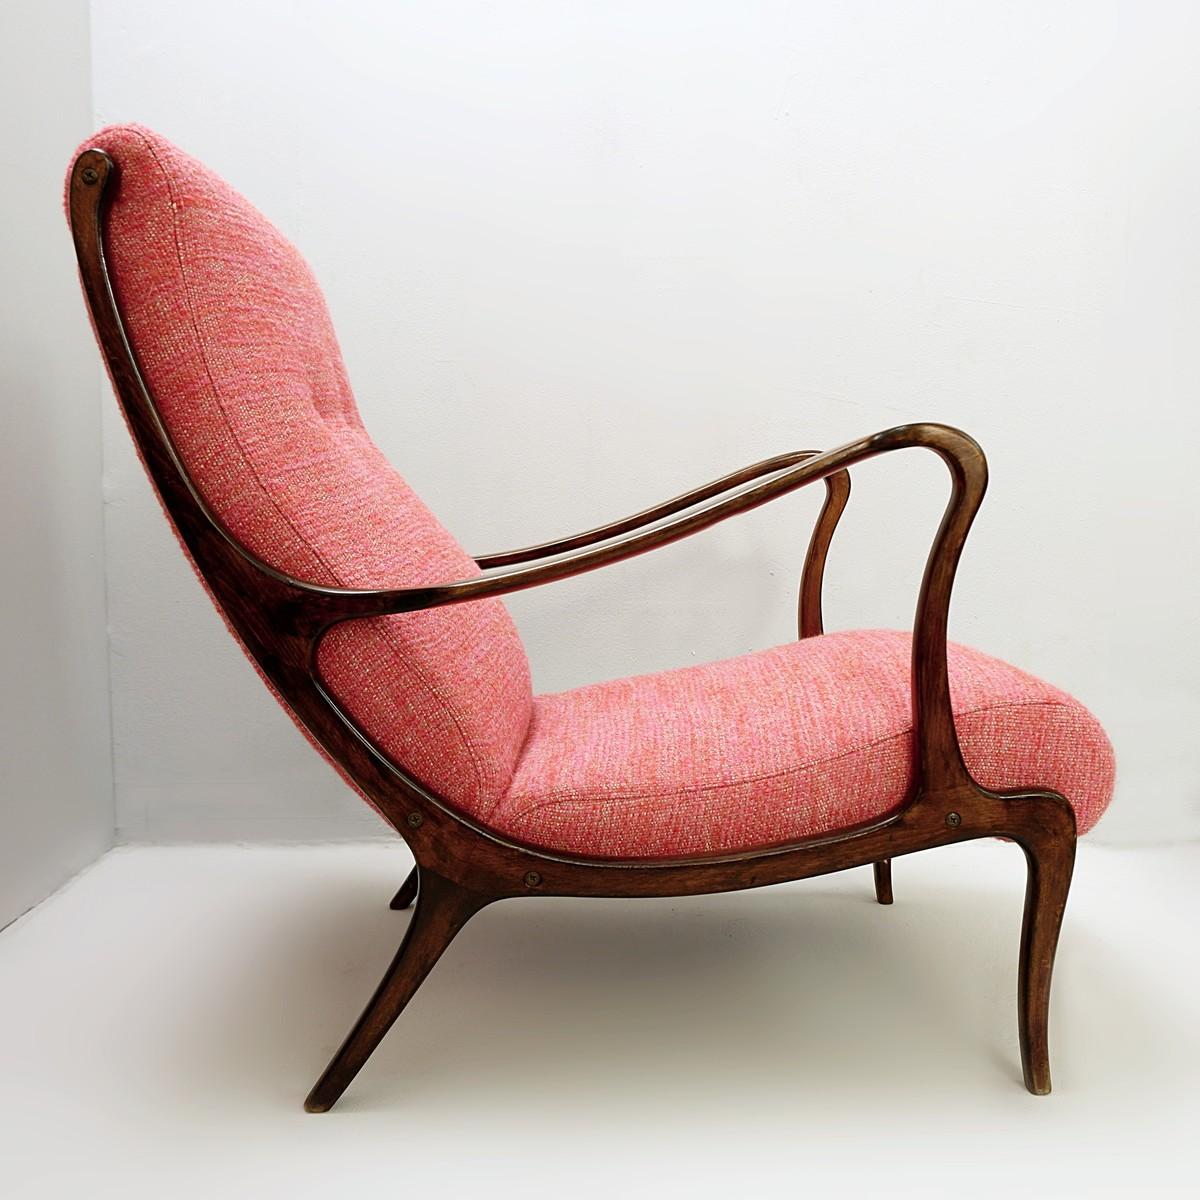 20th Century Pair of Lounge Chairs by Ezio Longhi, 1950s, New Upholstery